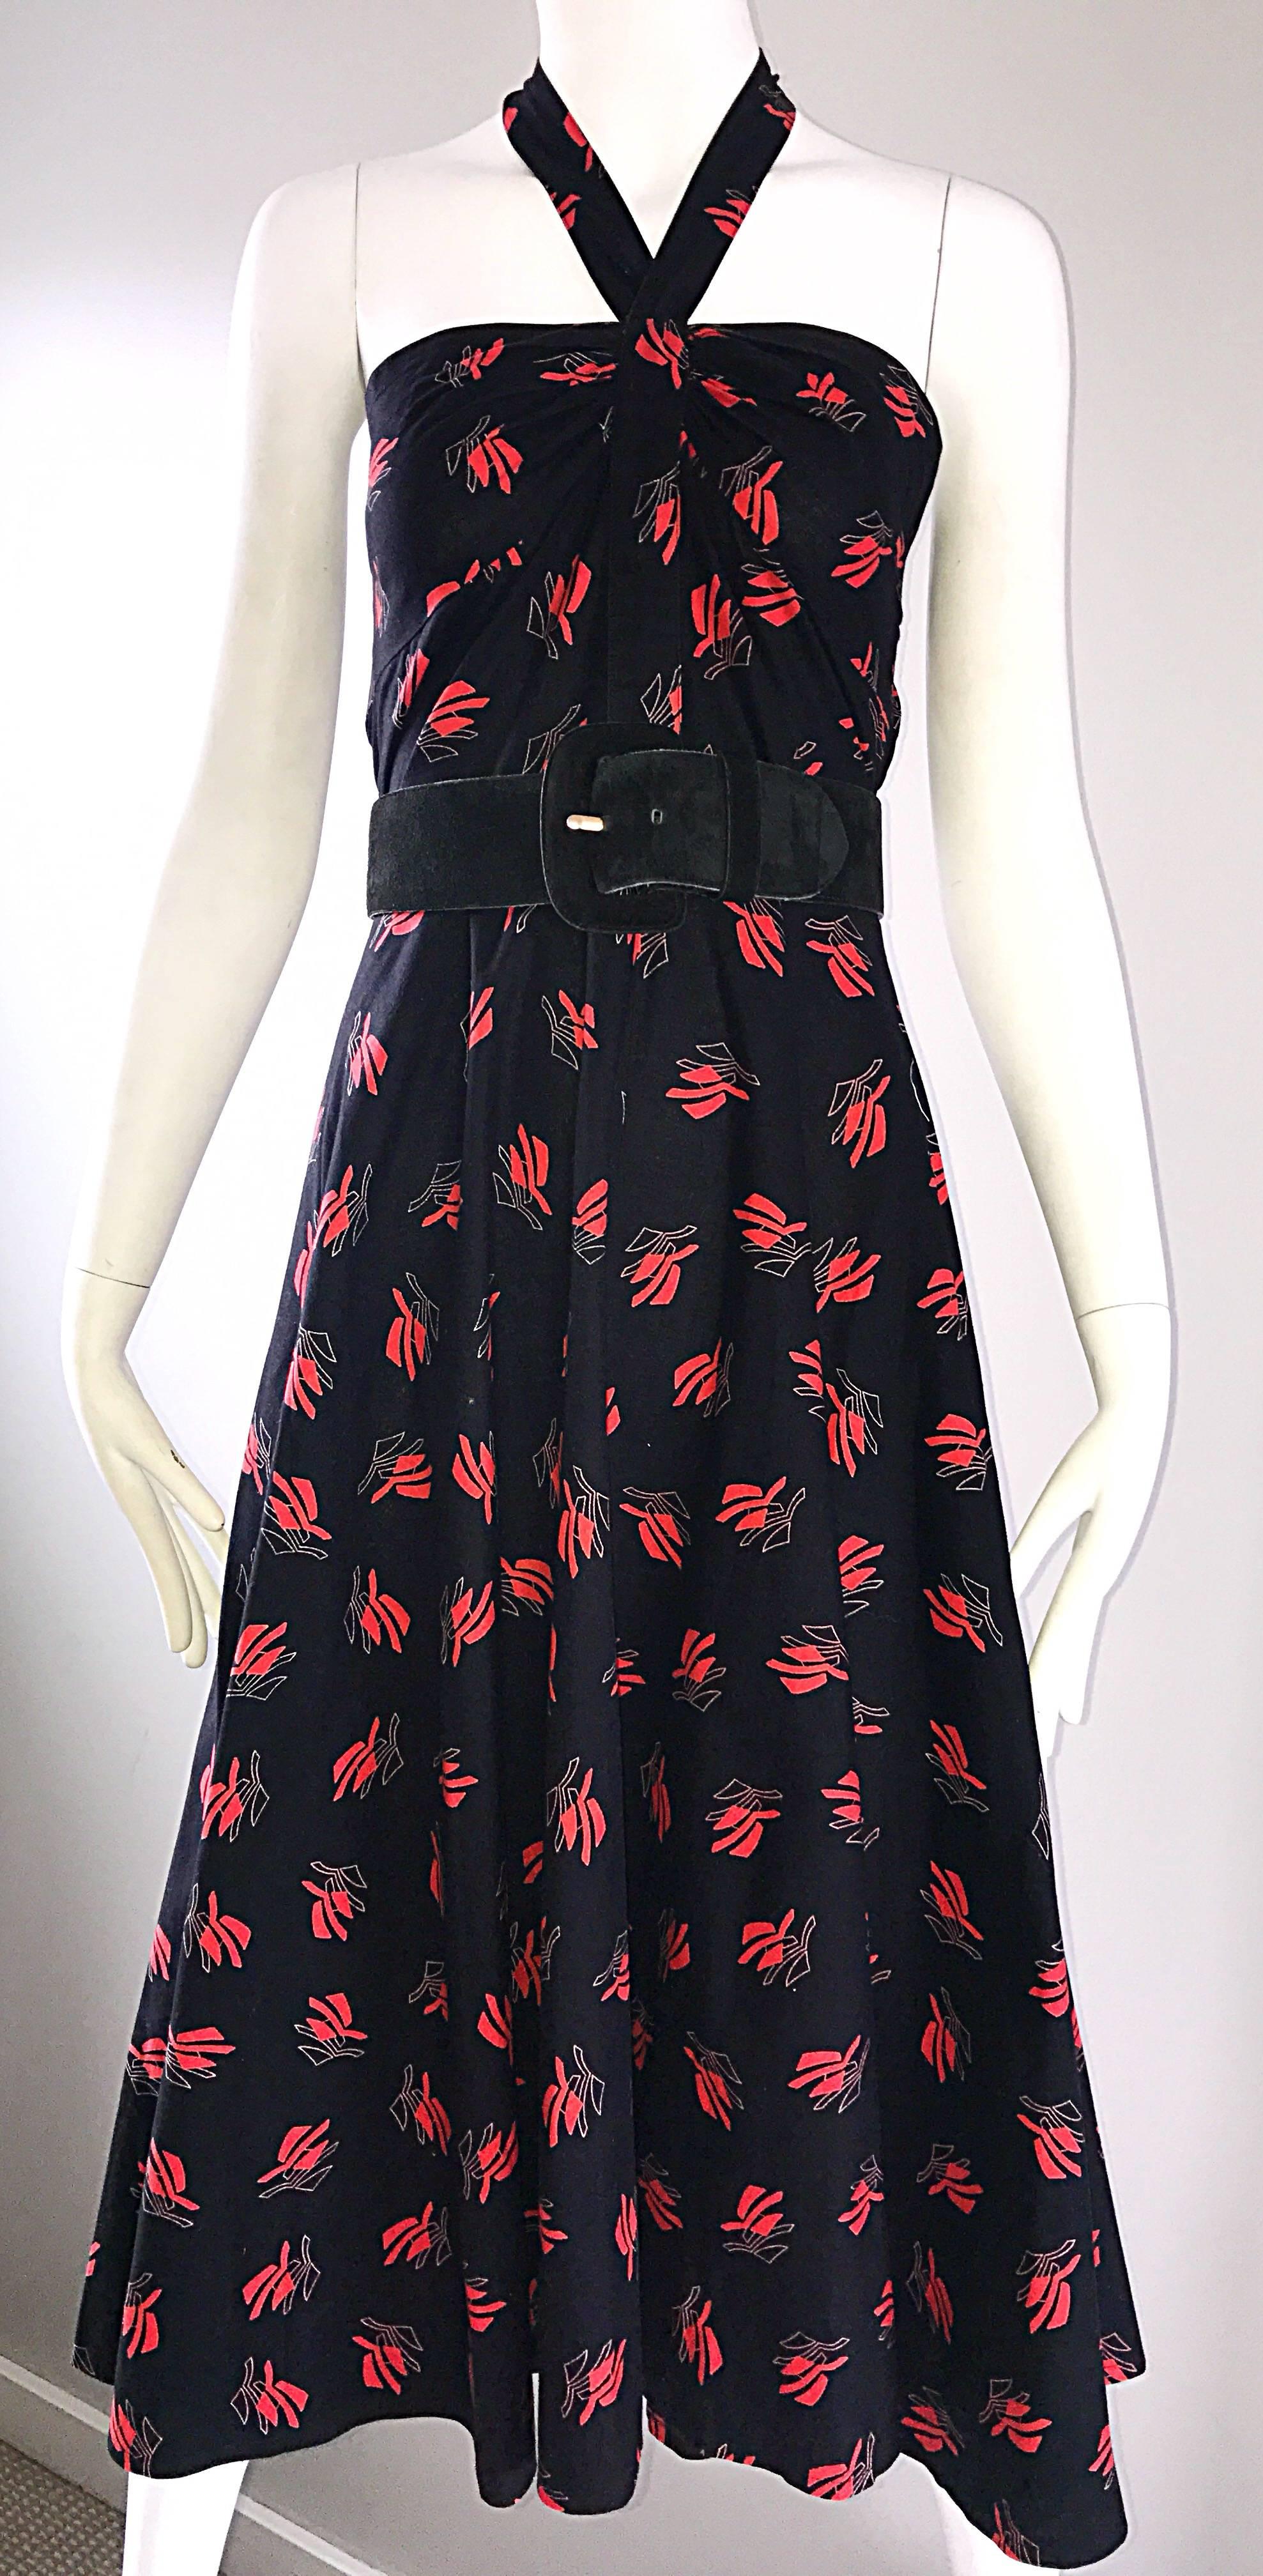 Vintage Guy Laroche Size 44 Black + Red Oriental Themed Cotton Halter Sun Dress  In Excellent Condition For Sale In San Diego, CA